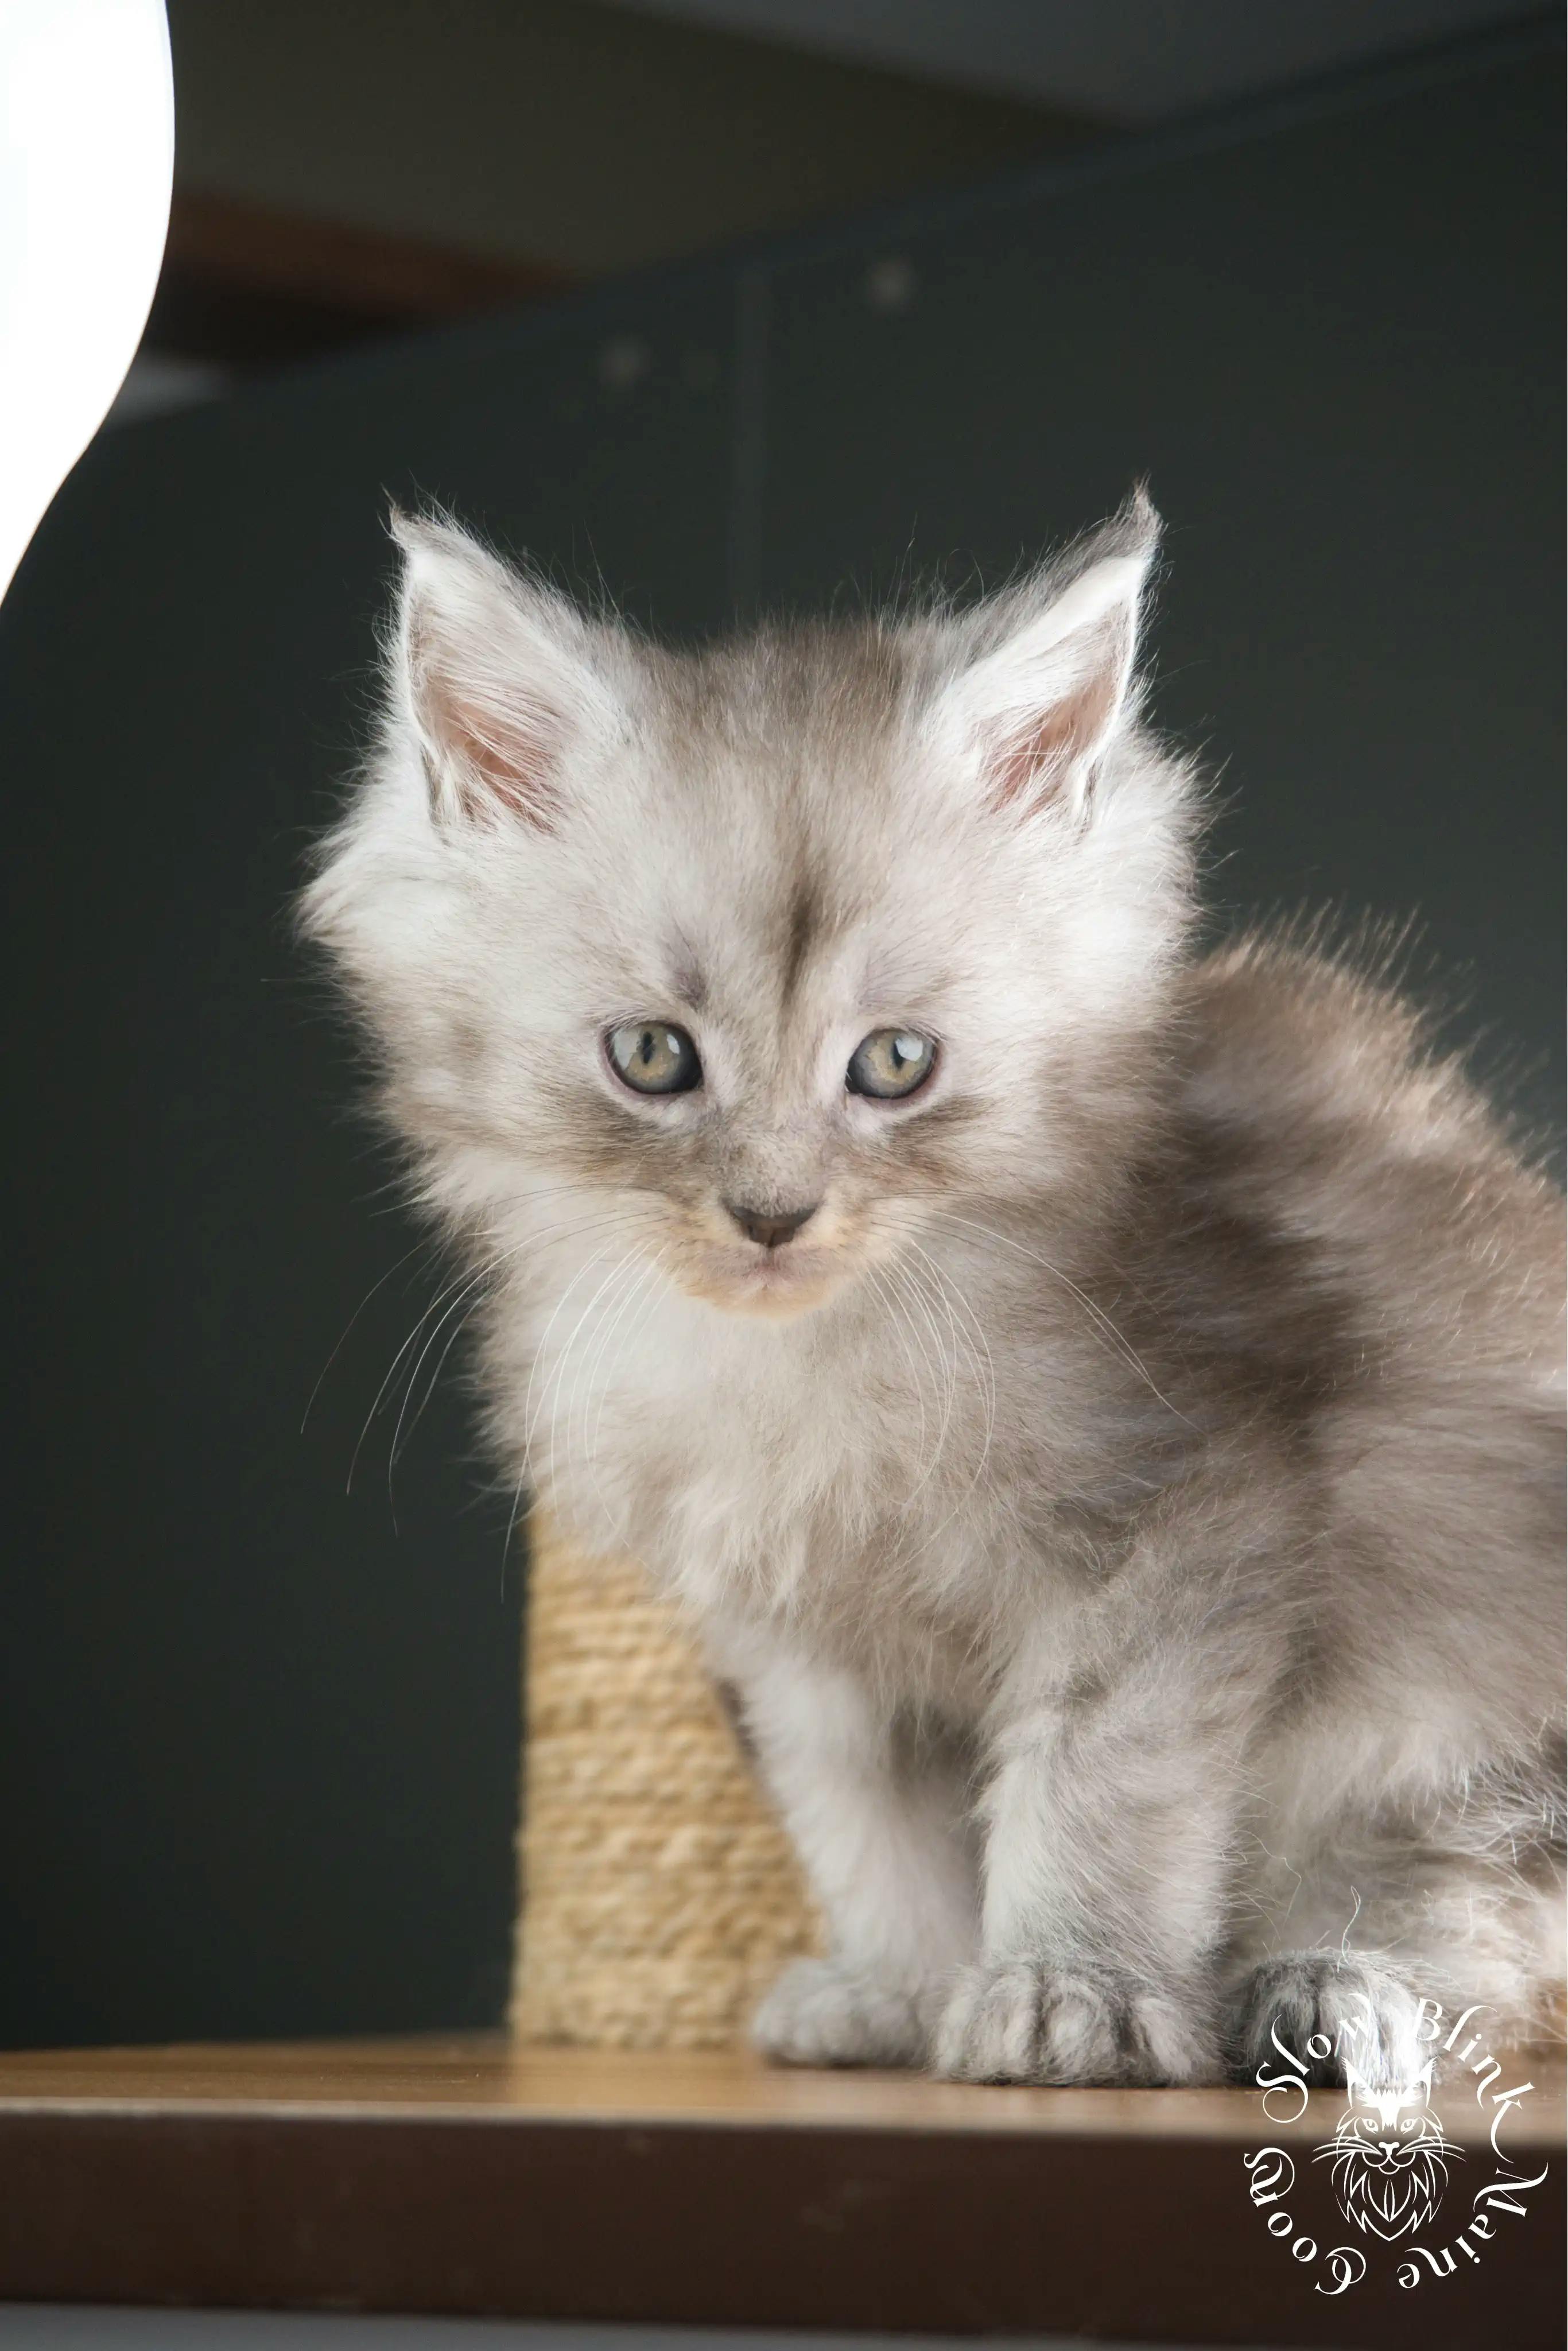 High Silver Maine Coon Kittens > black silver tabby maine coon kitten | ems code ns 22 23 24 25 | slowblinkmainecoons | 1001